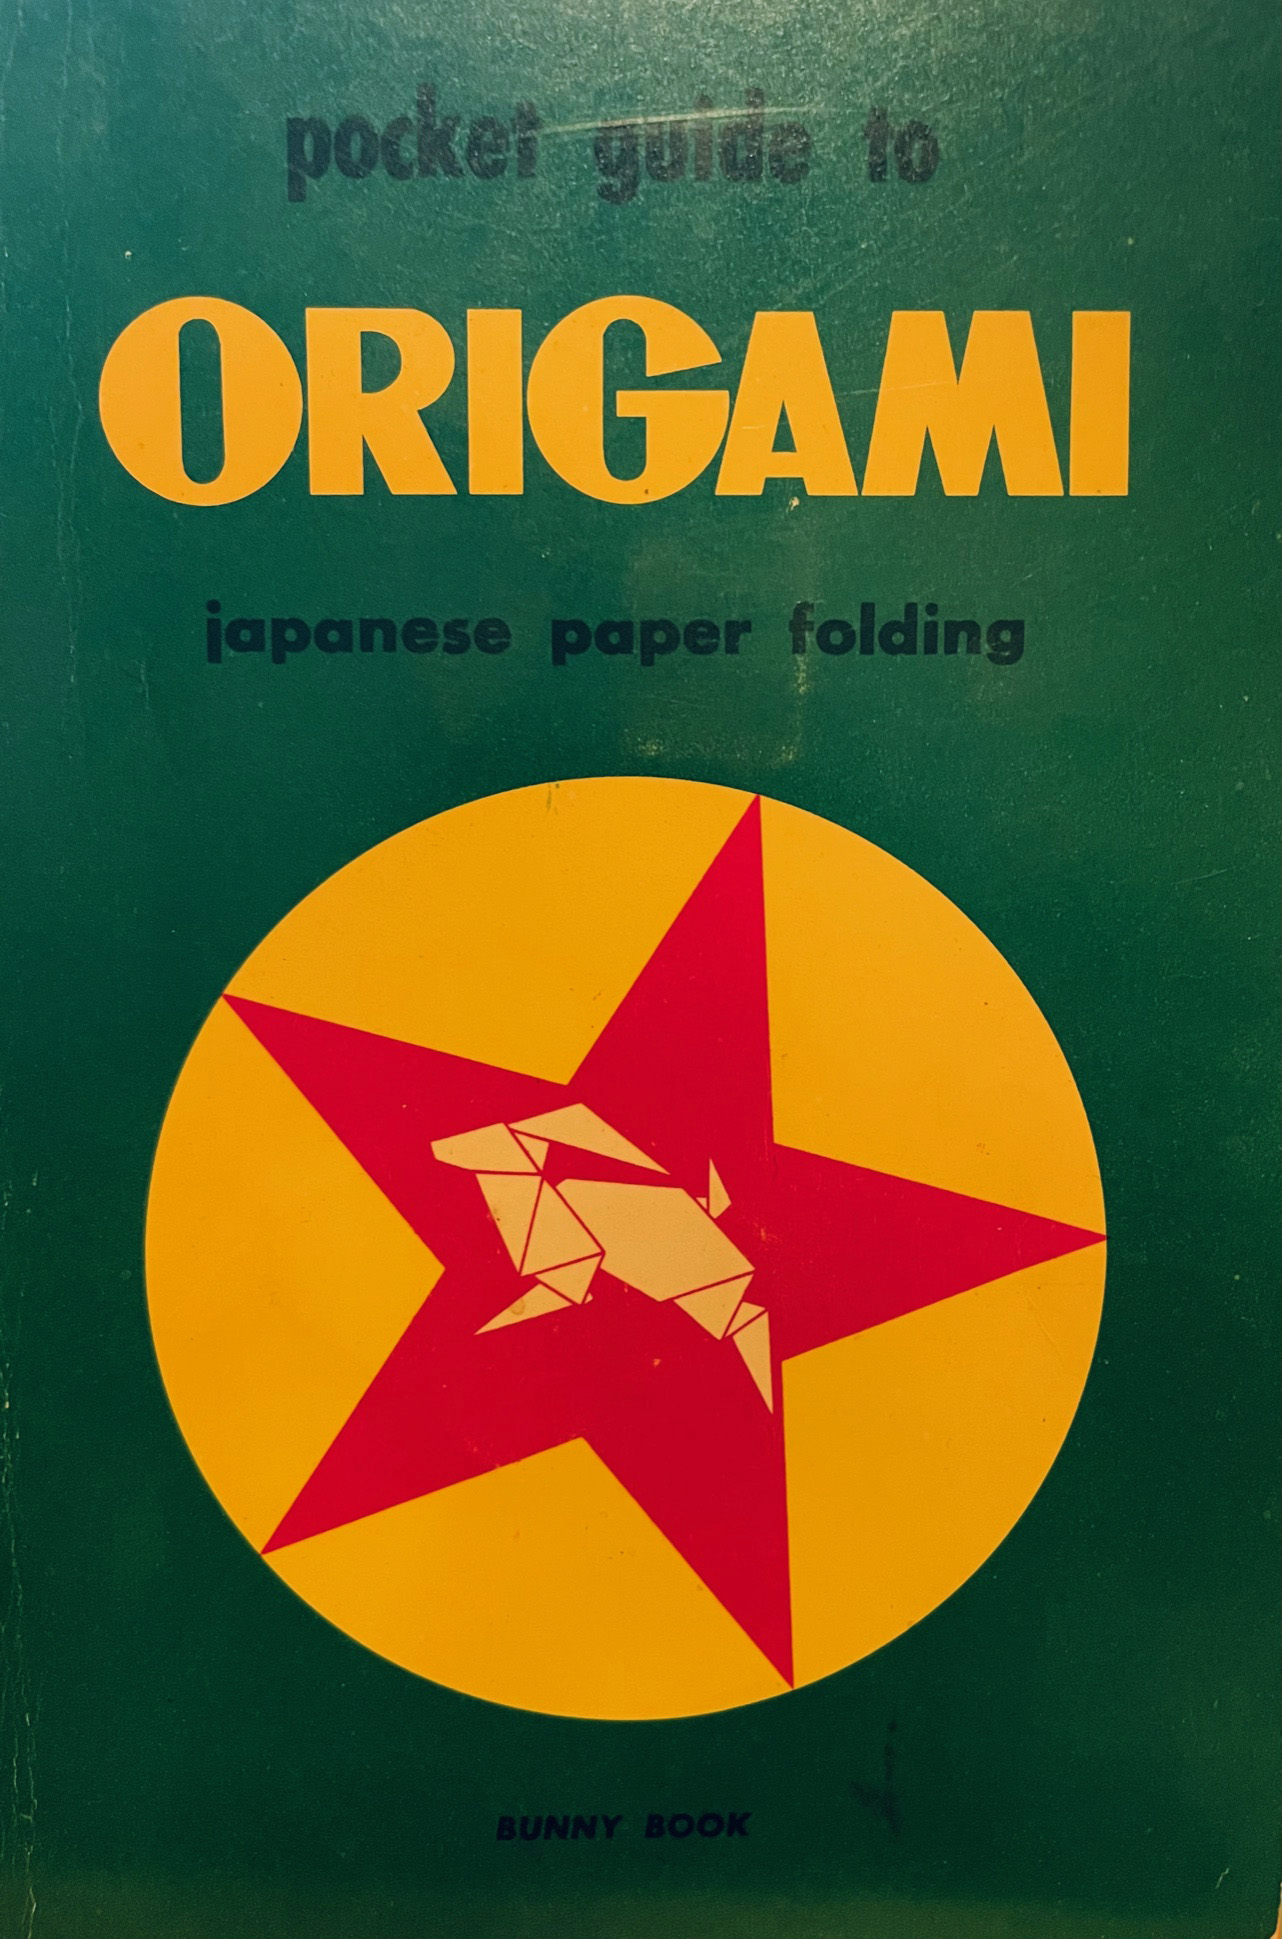 Pocket Guide to Origami - Bunny Book